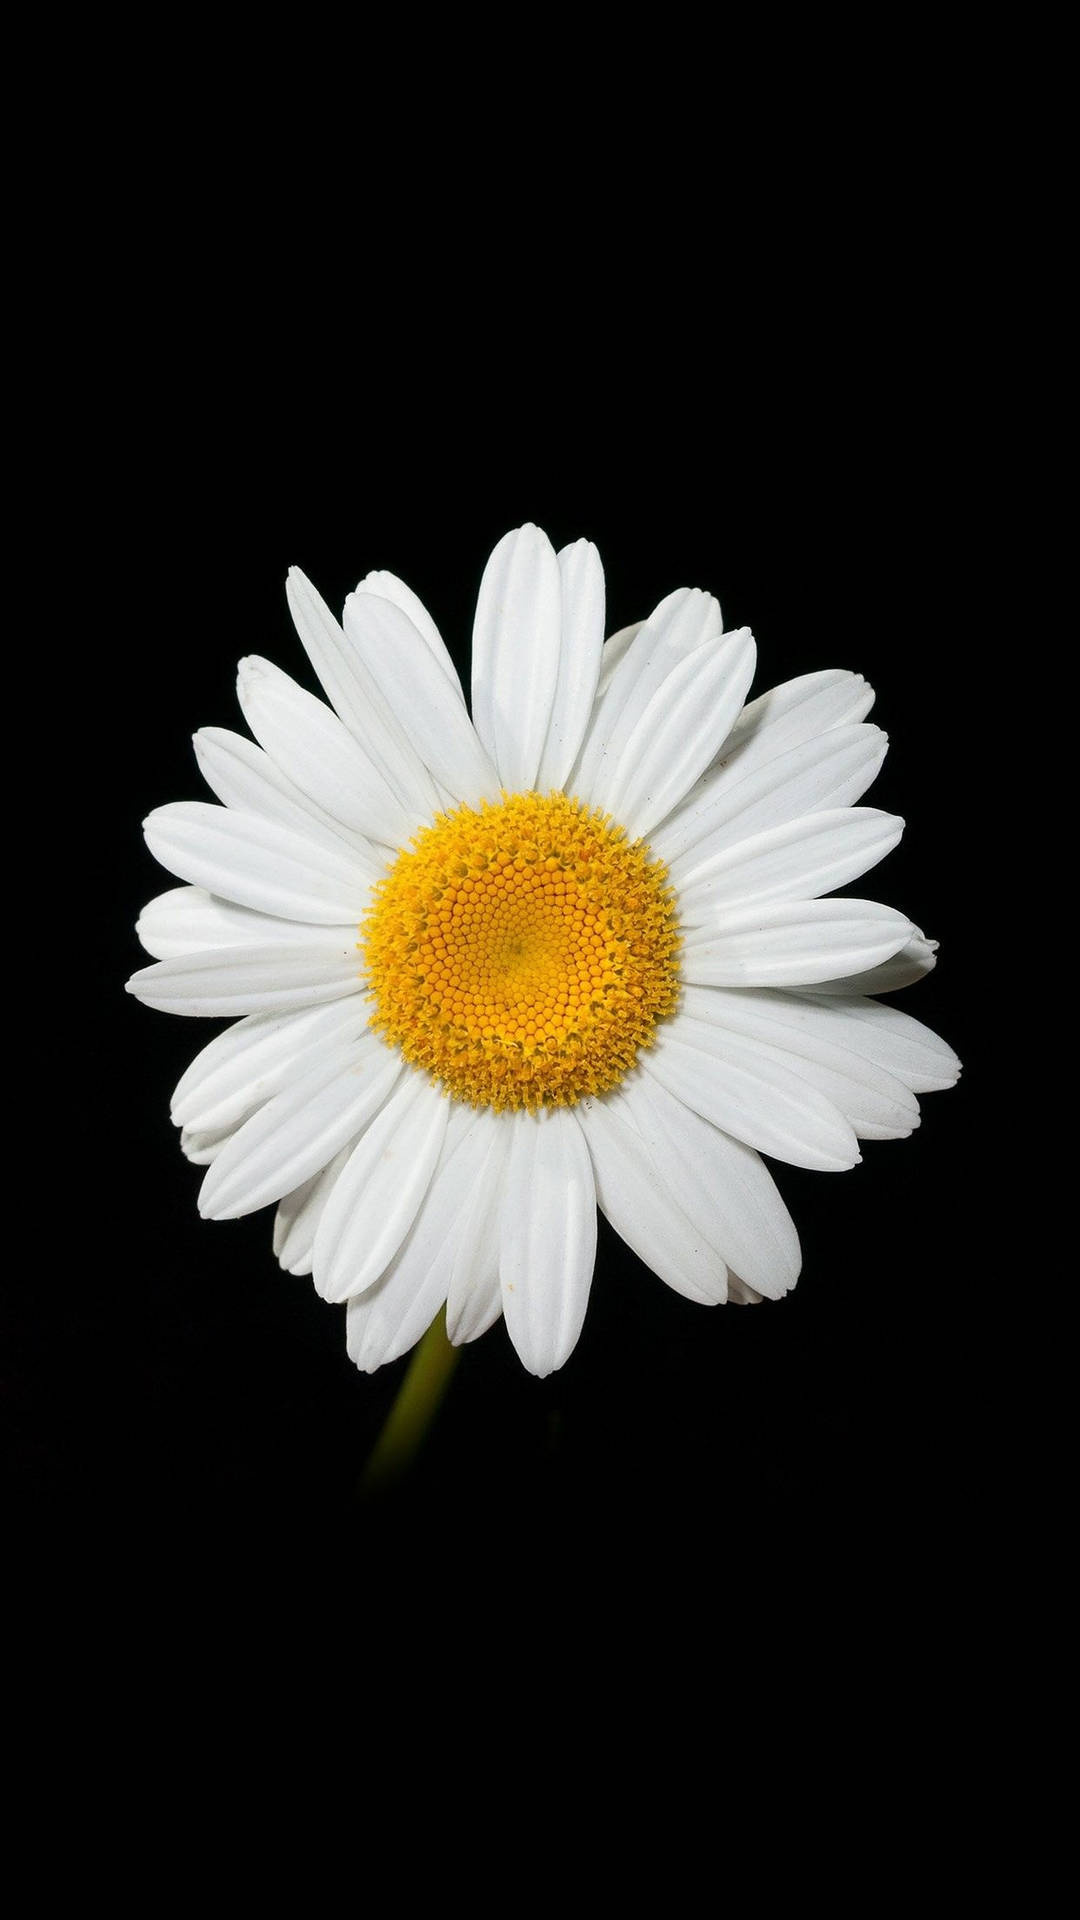 Caption: A Aesthetic White Daisy On Black Background For Phone Wallpaper Background